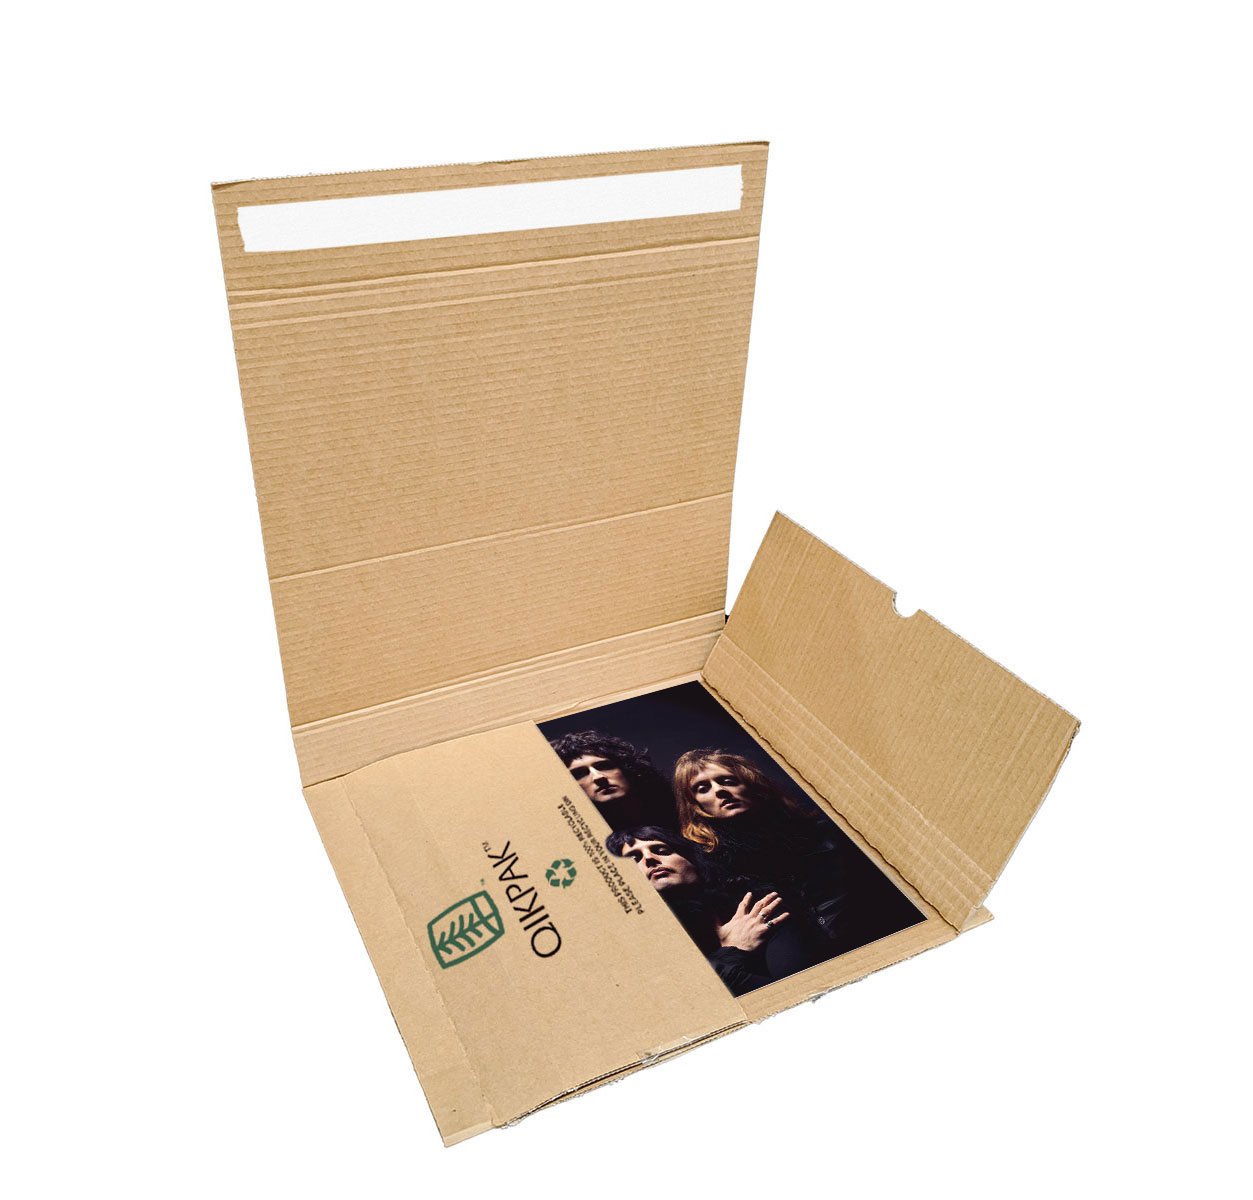 New LP Vinyl Record Carboard Mailers UBEECO Packaging Solutions